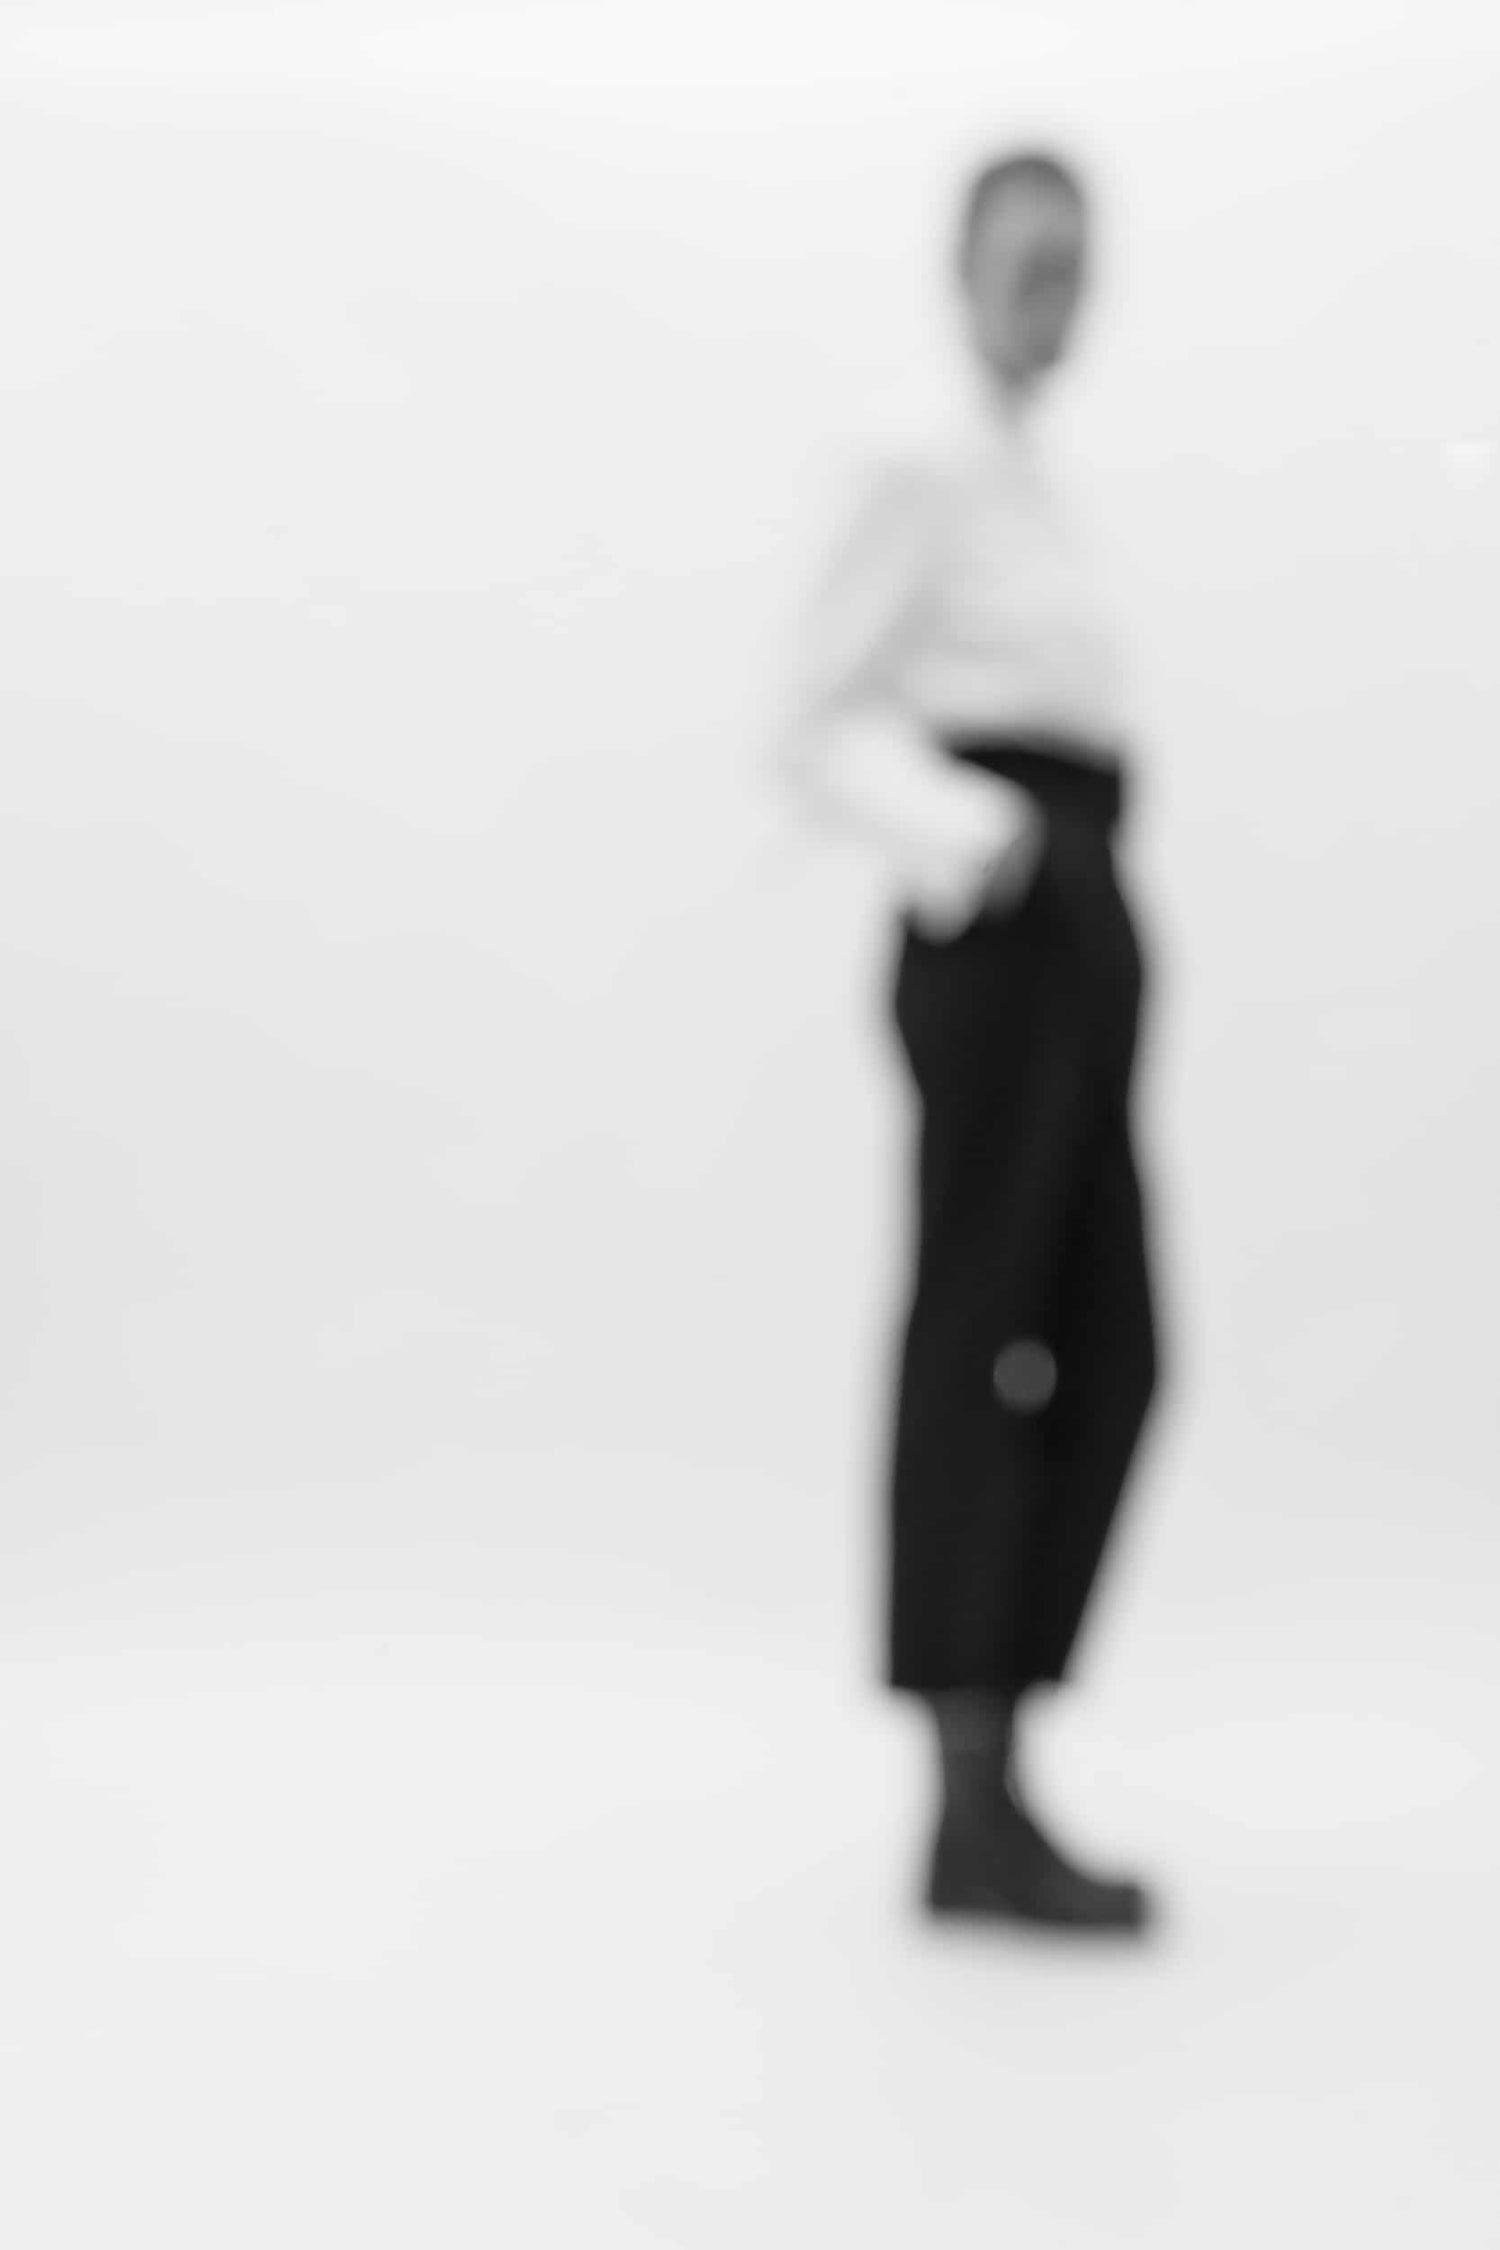 The artpiece 'Silhouette' by Mathieu Puga is black and white fine-art piece, which shows a woman in black pants and a white blouse, standing with her hand in her pocket. The image is blurred, causing parts of the image to seemingly disappear into the background.